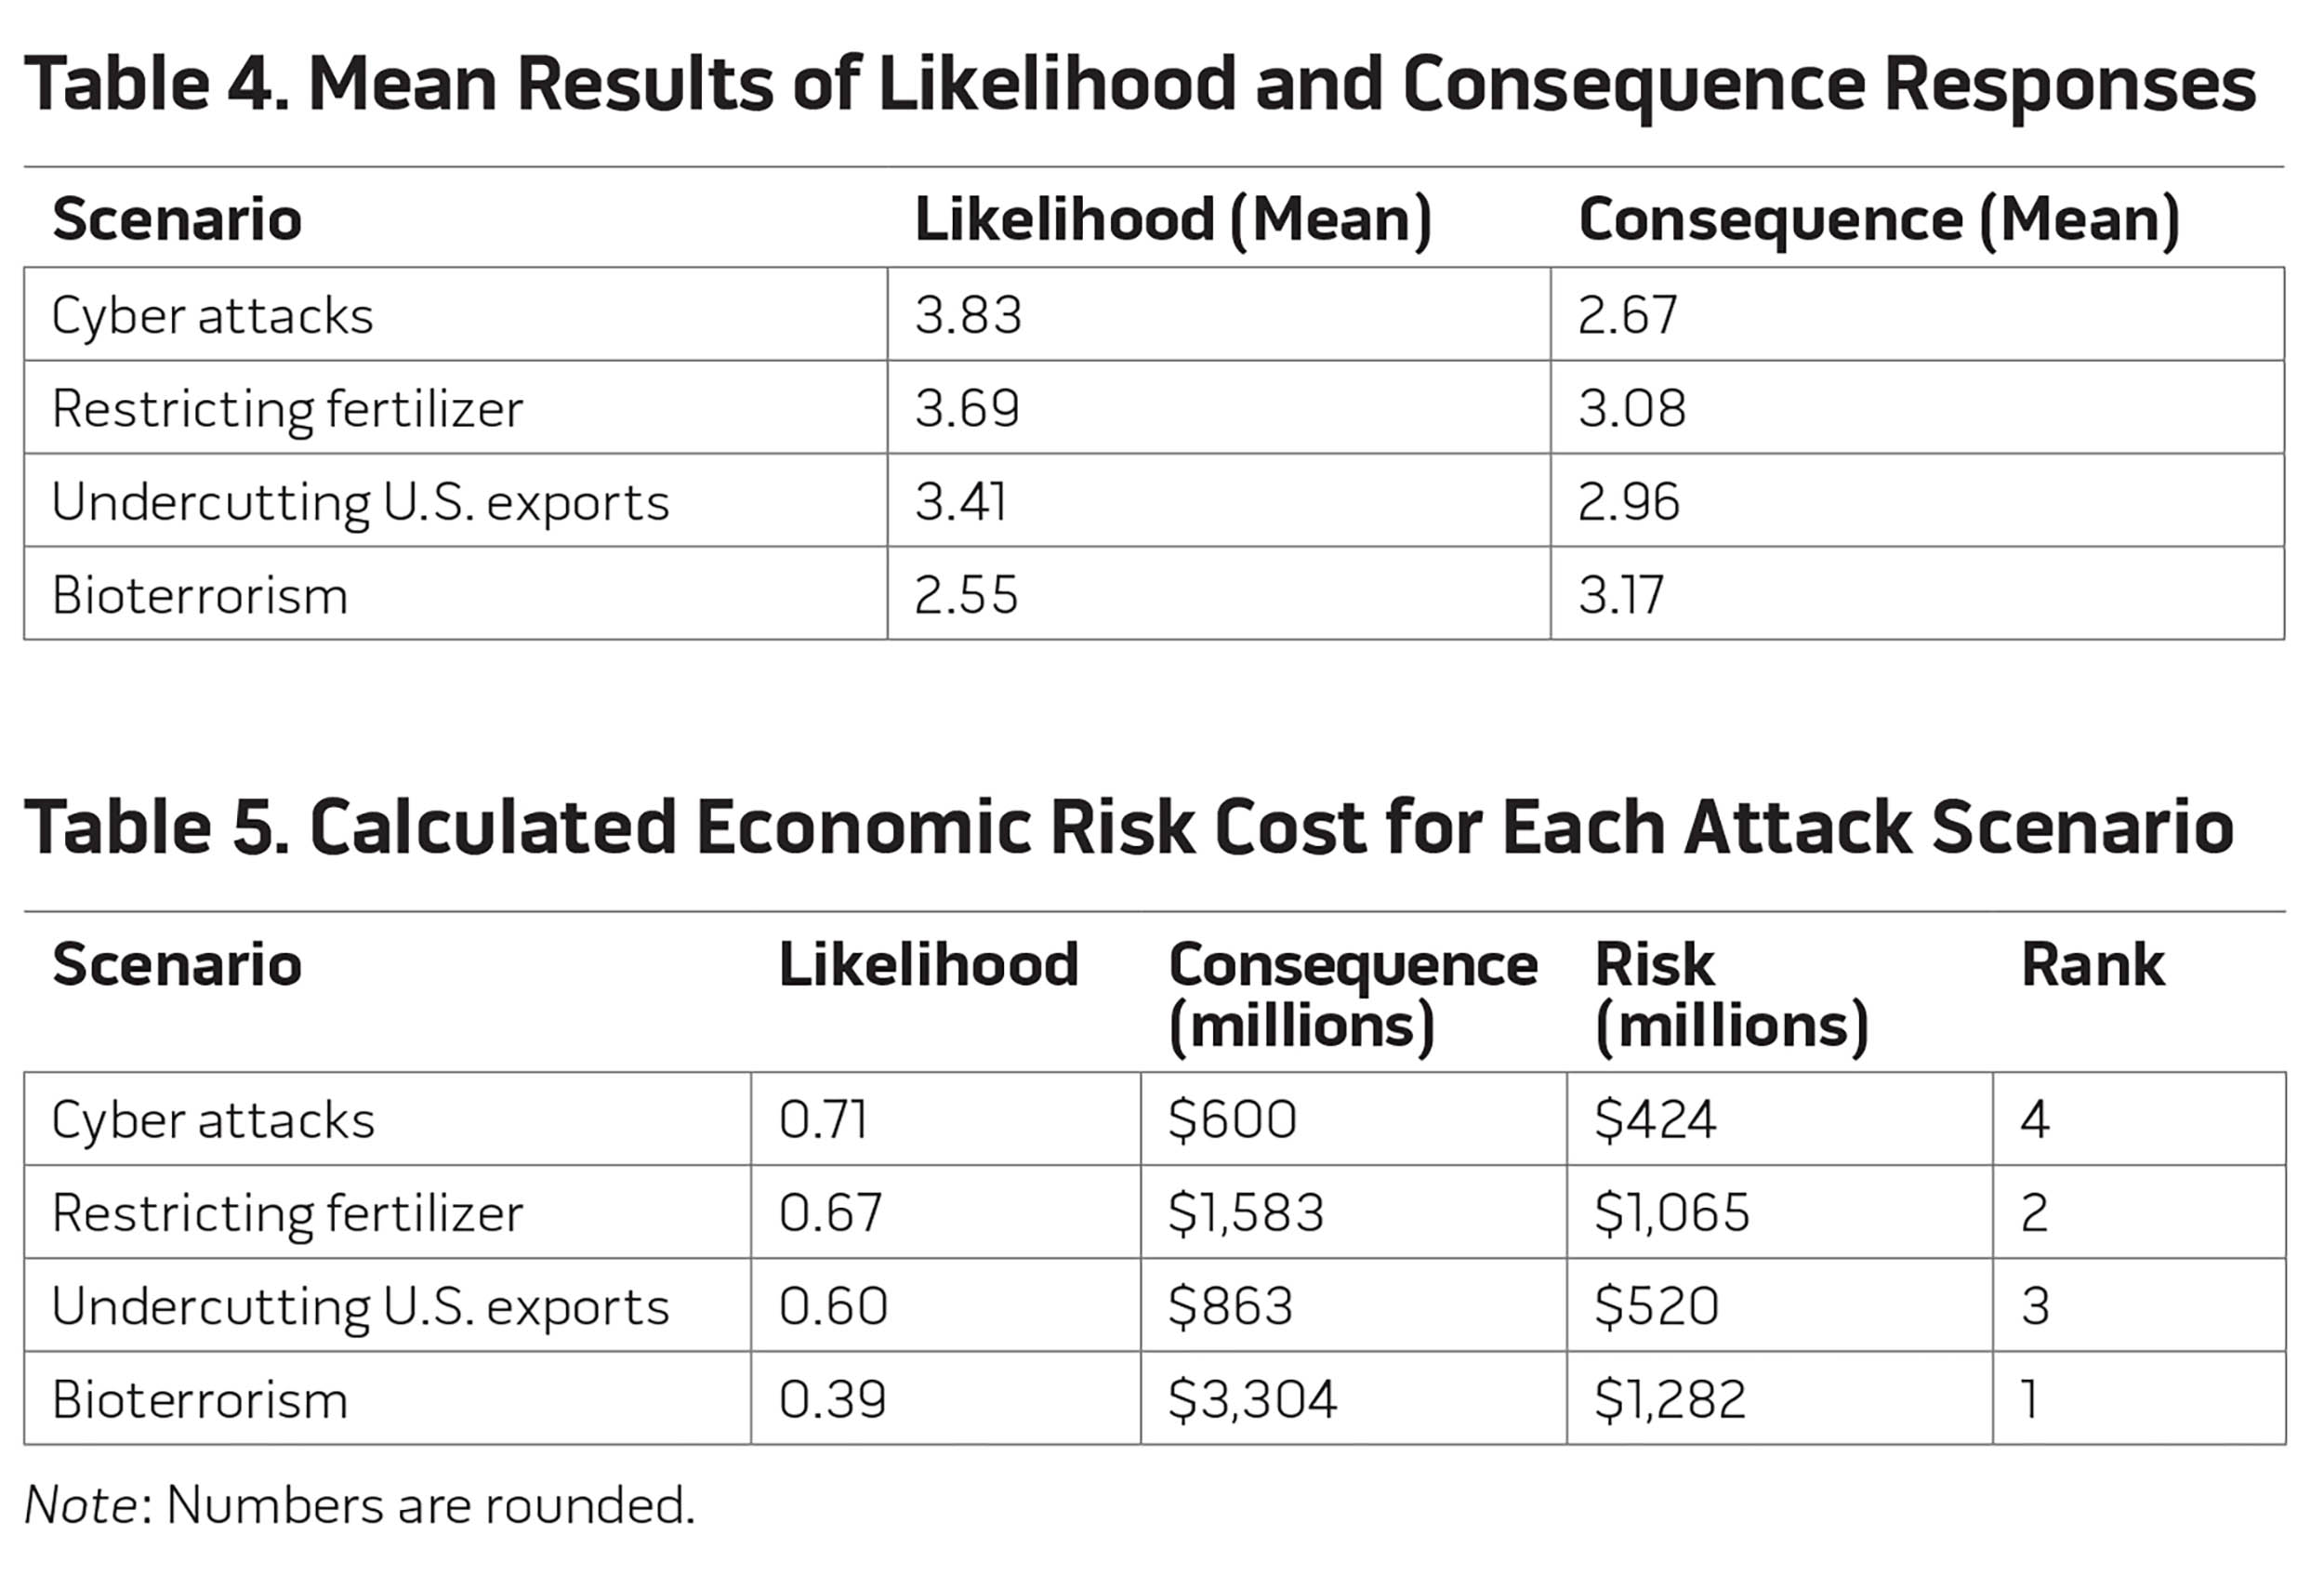 Table 4. Mean Results of Likelihood and Consequence Responses and Table 5. Calculated Economic Risk Cost for Each Attack Scenario